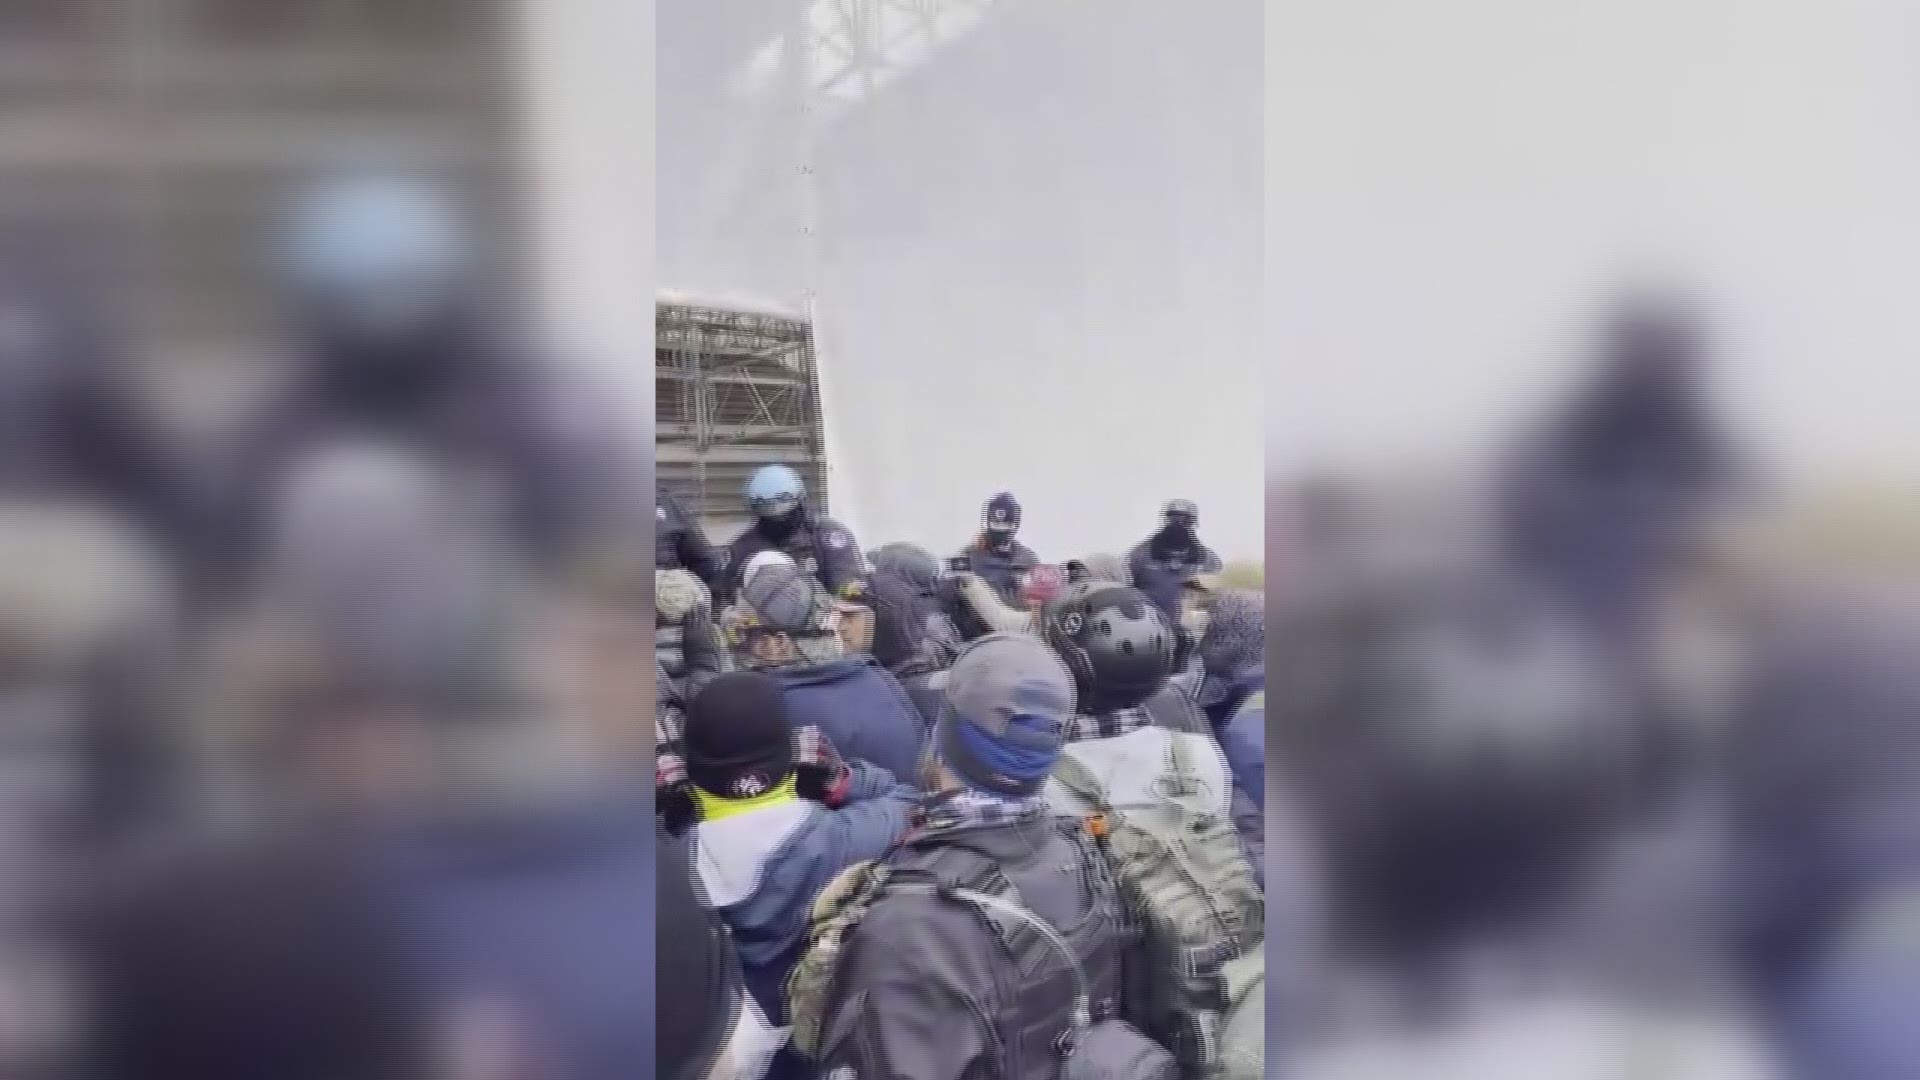 New video released by the DOJ shows a group of Capitol rioters, including several Proud Boys, charging police on January 6, 2021.